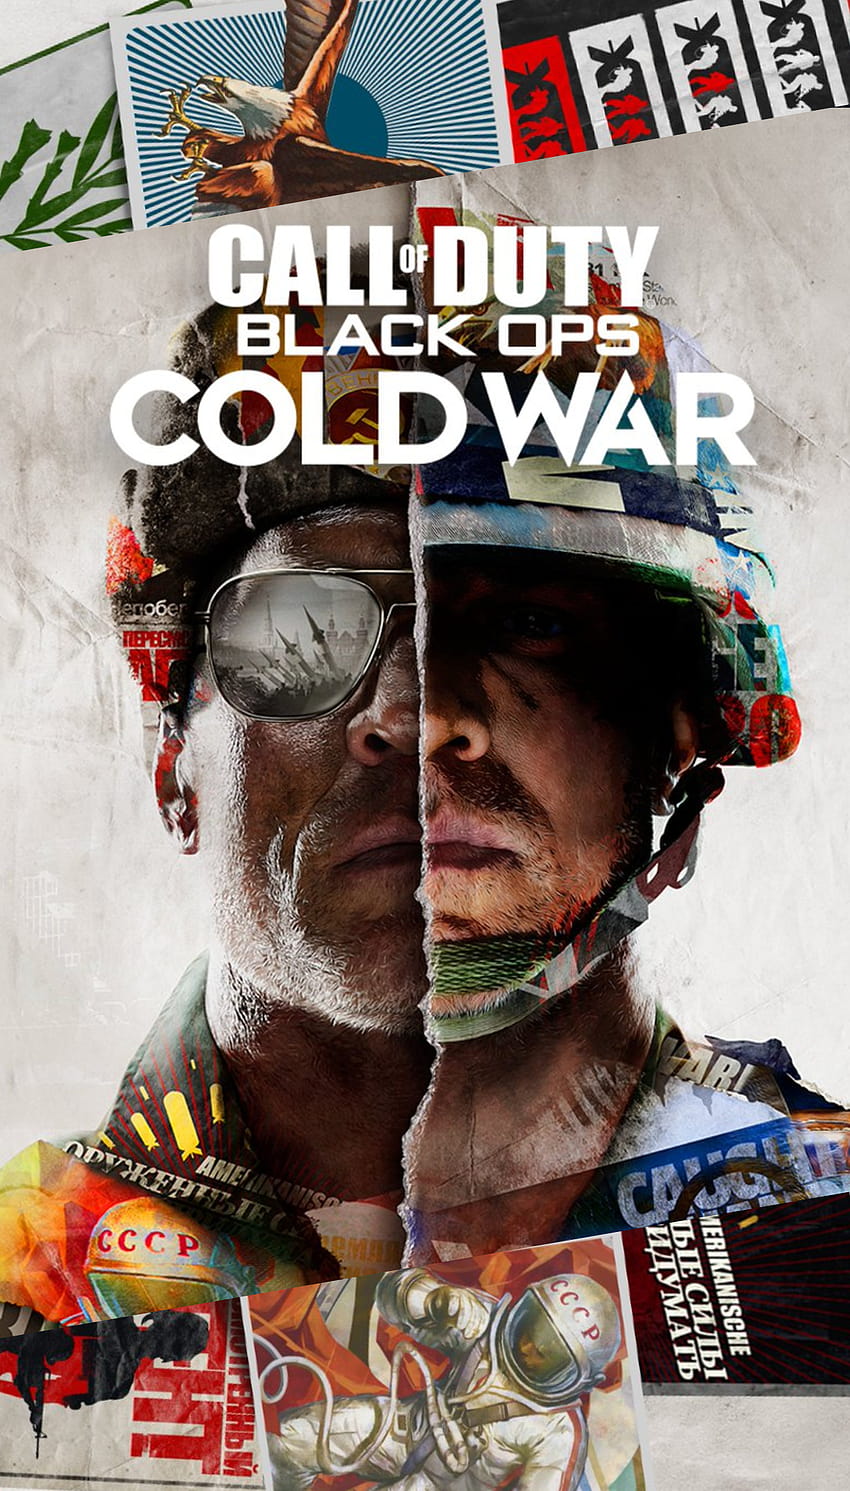 COD] Just made this phone For Cold War : blackopscoldwar, call of duty black ops cold war HD phone wallpaper